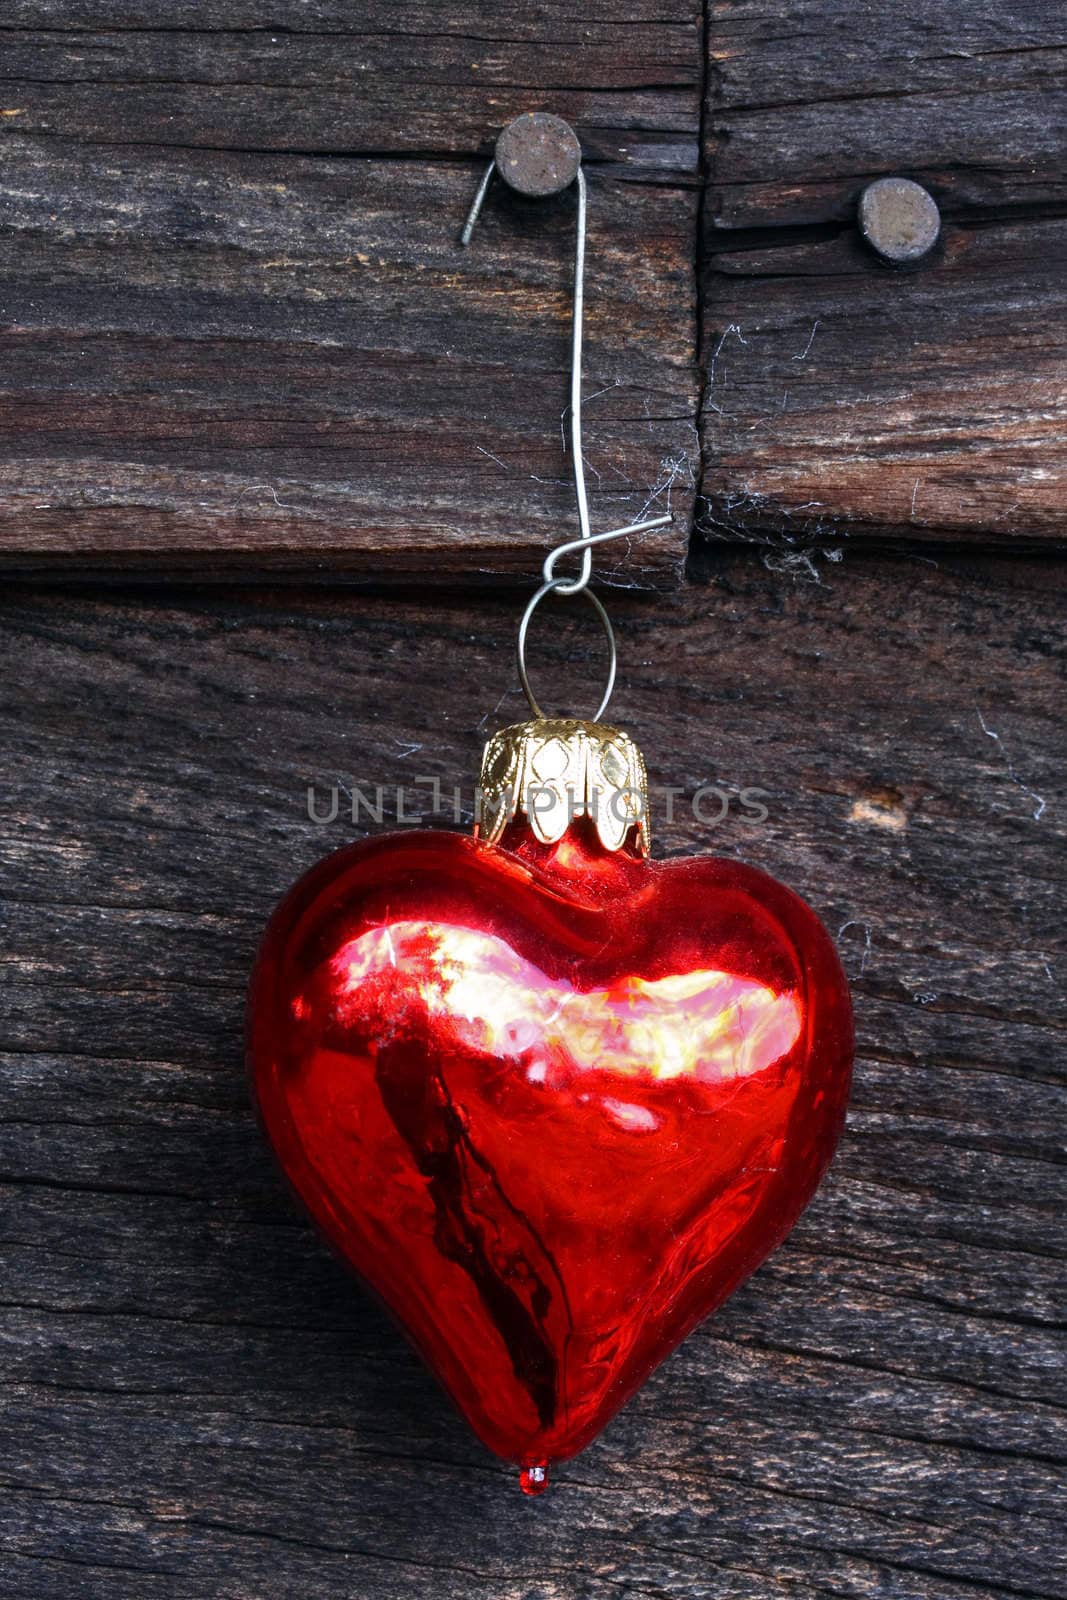 Heart ornament on wood, vertical.